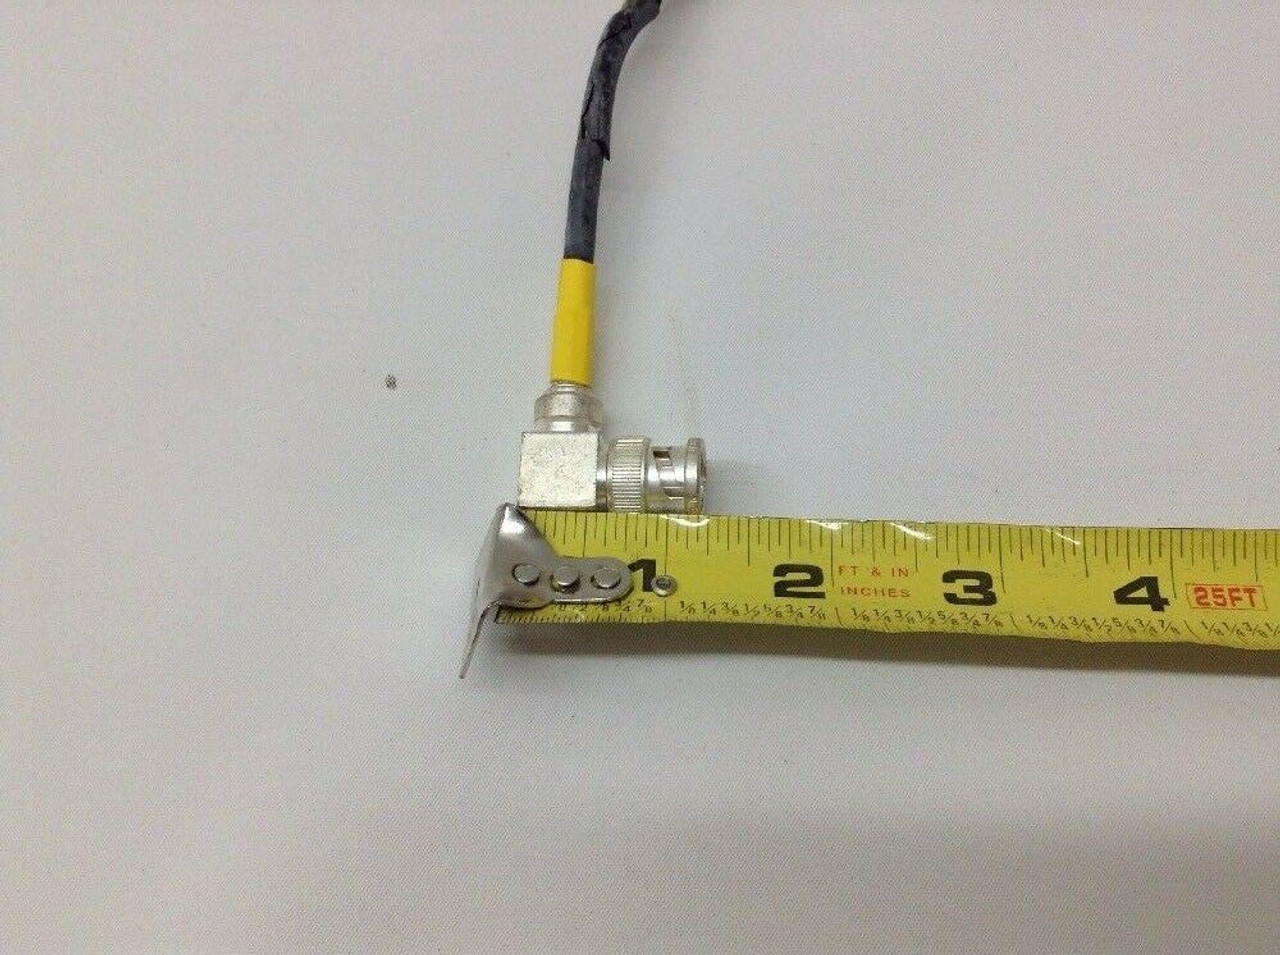 2 ft. Radio Frequency Cable Assembly SM-D-415563-2FT